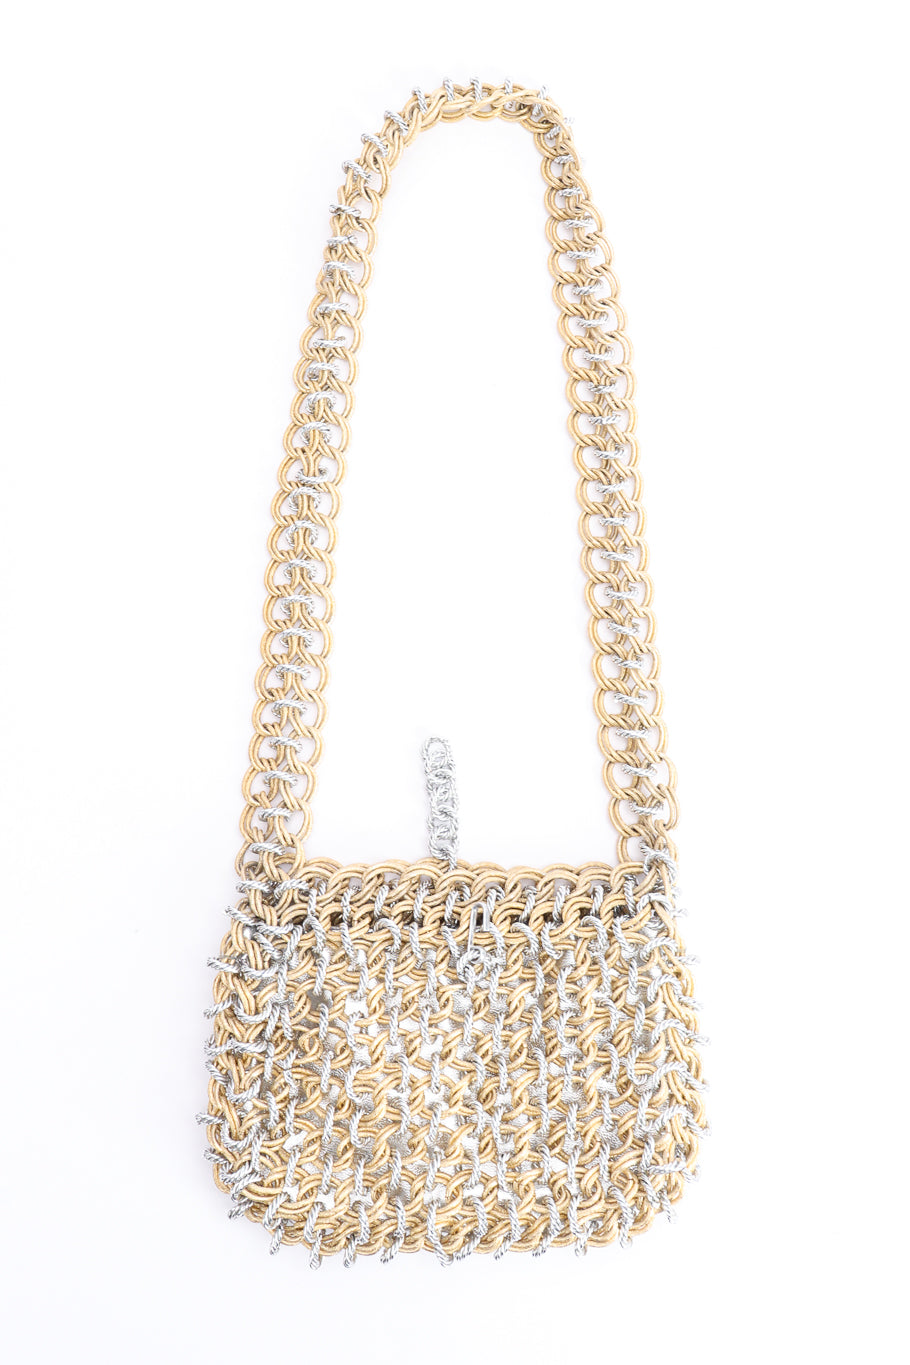 Vintage Raoul Calabro Mixed Metal Chainmail Shoulder Bag front view on white backdrop @Recessla